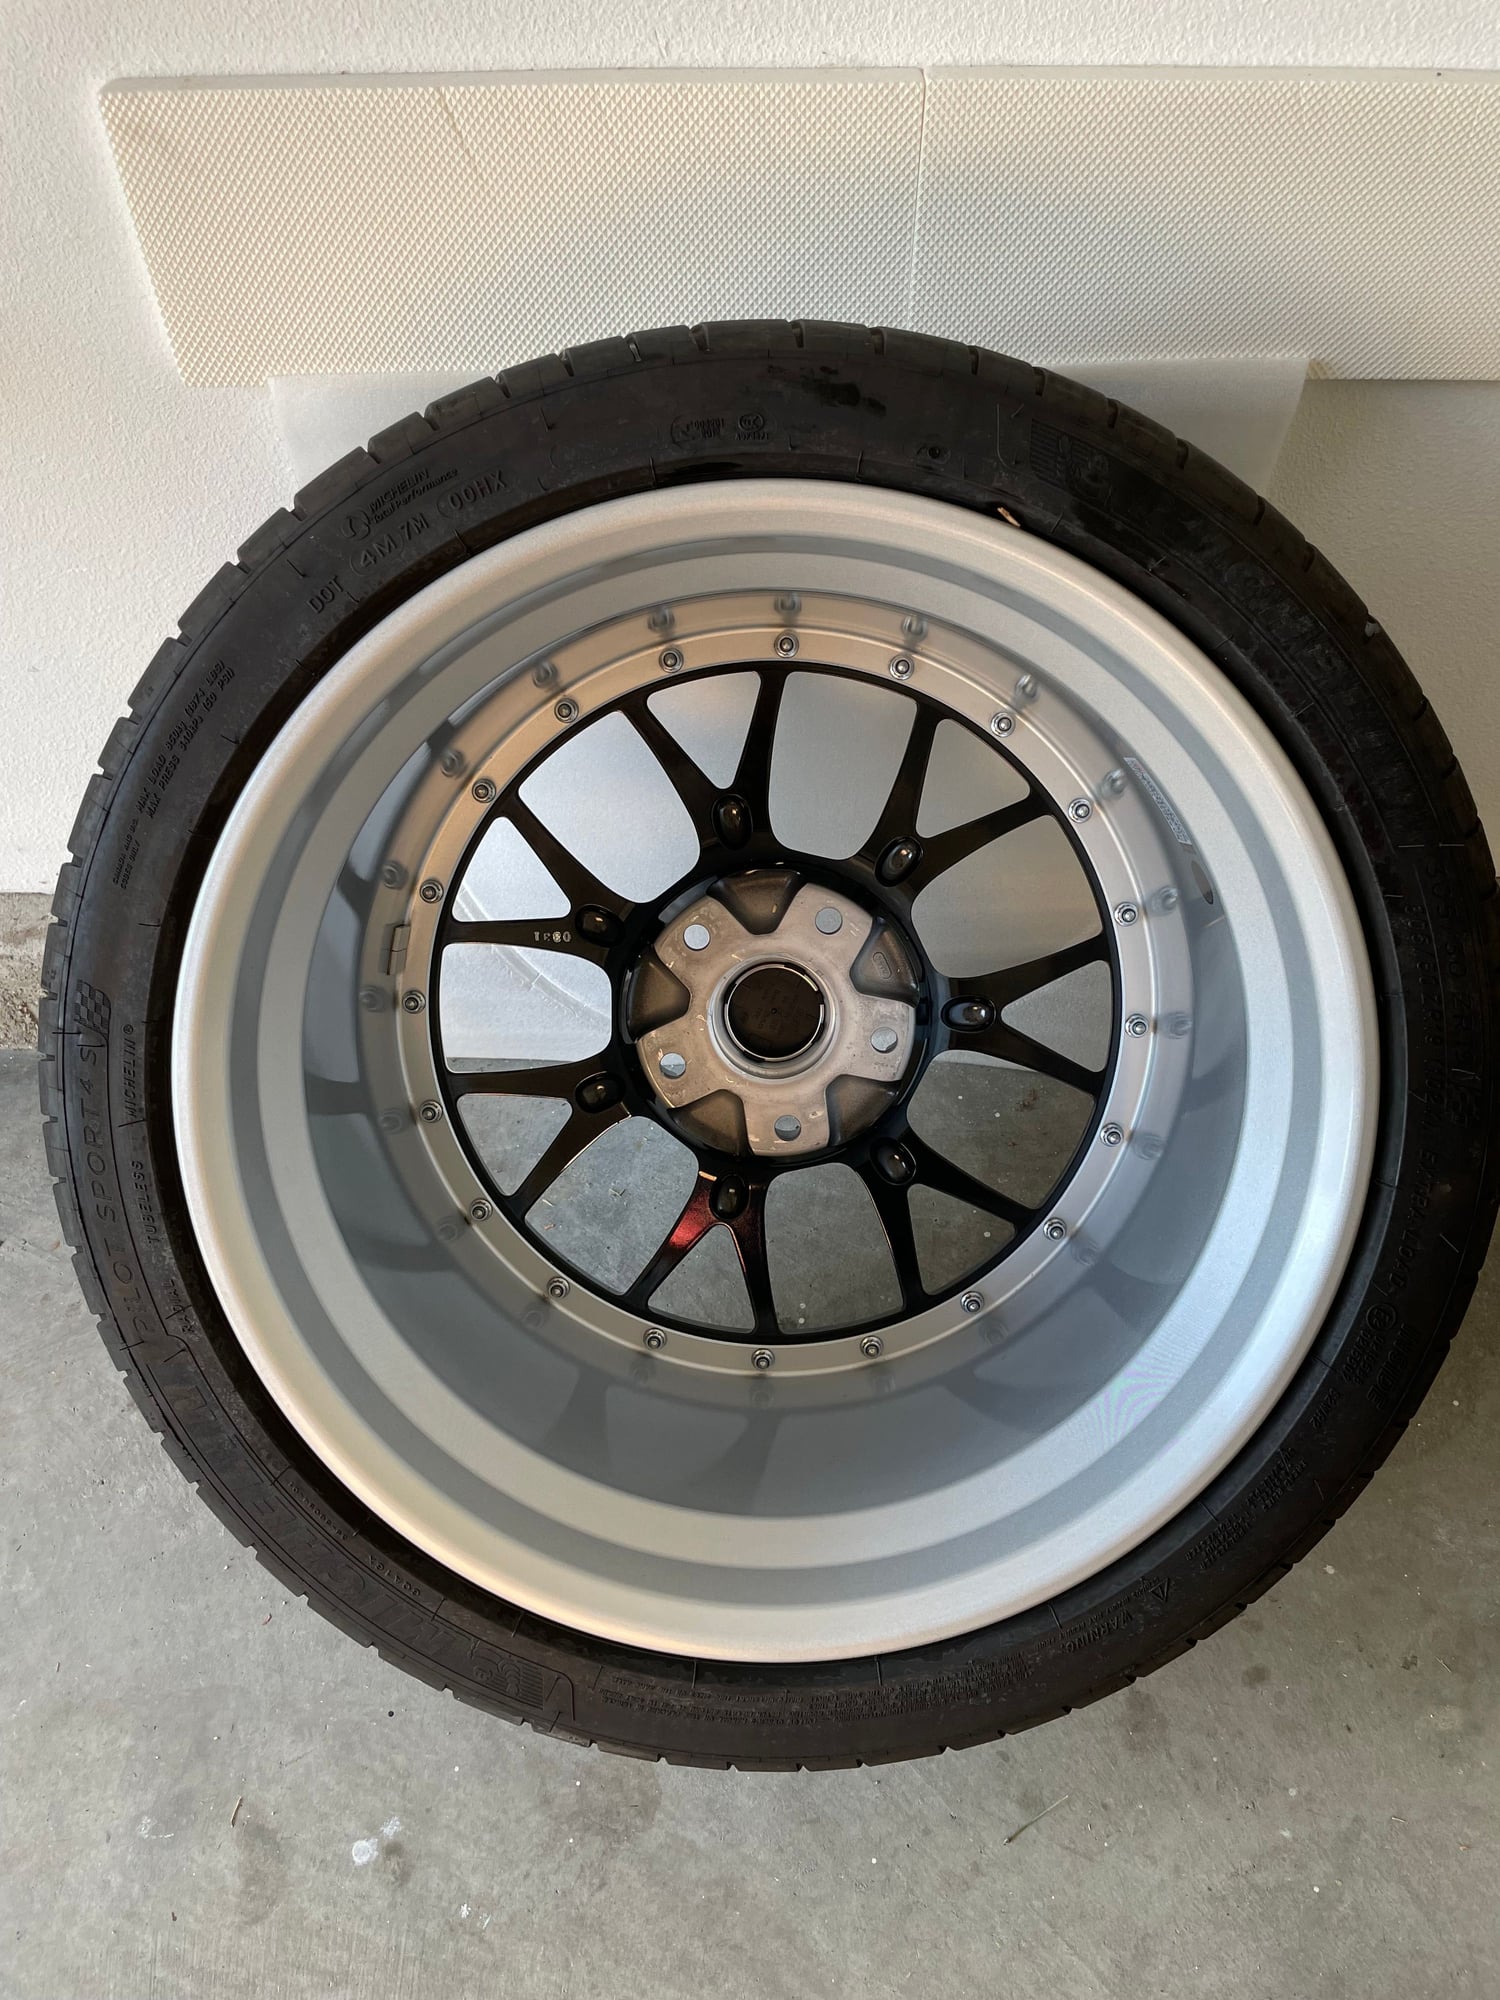 Wheels and Tires/Axles - BBS LMR - Used - 2005 to 2012 Porsche 911 - Industry, CA 91789, United States